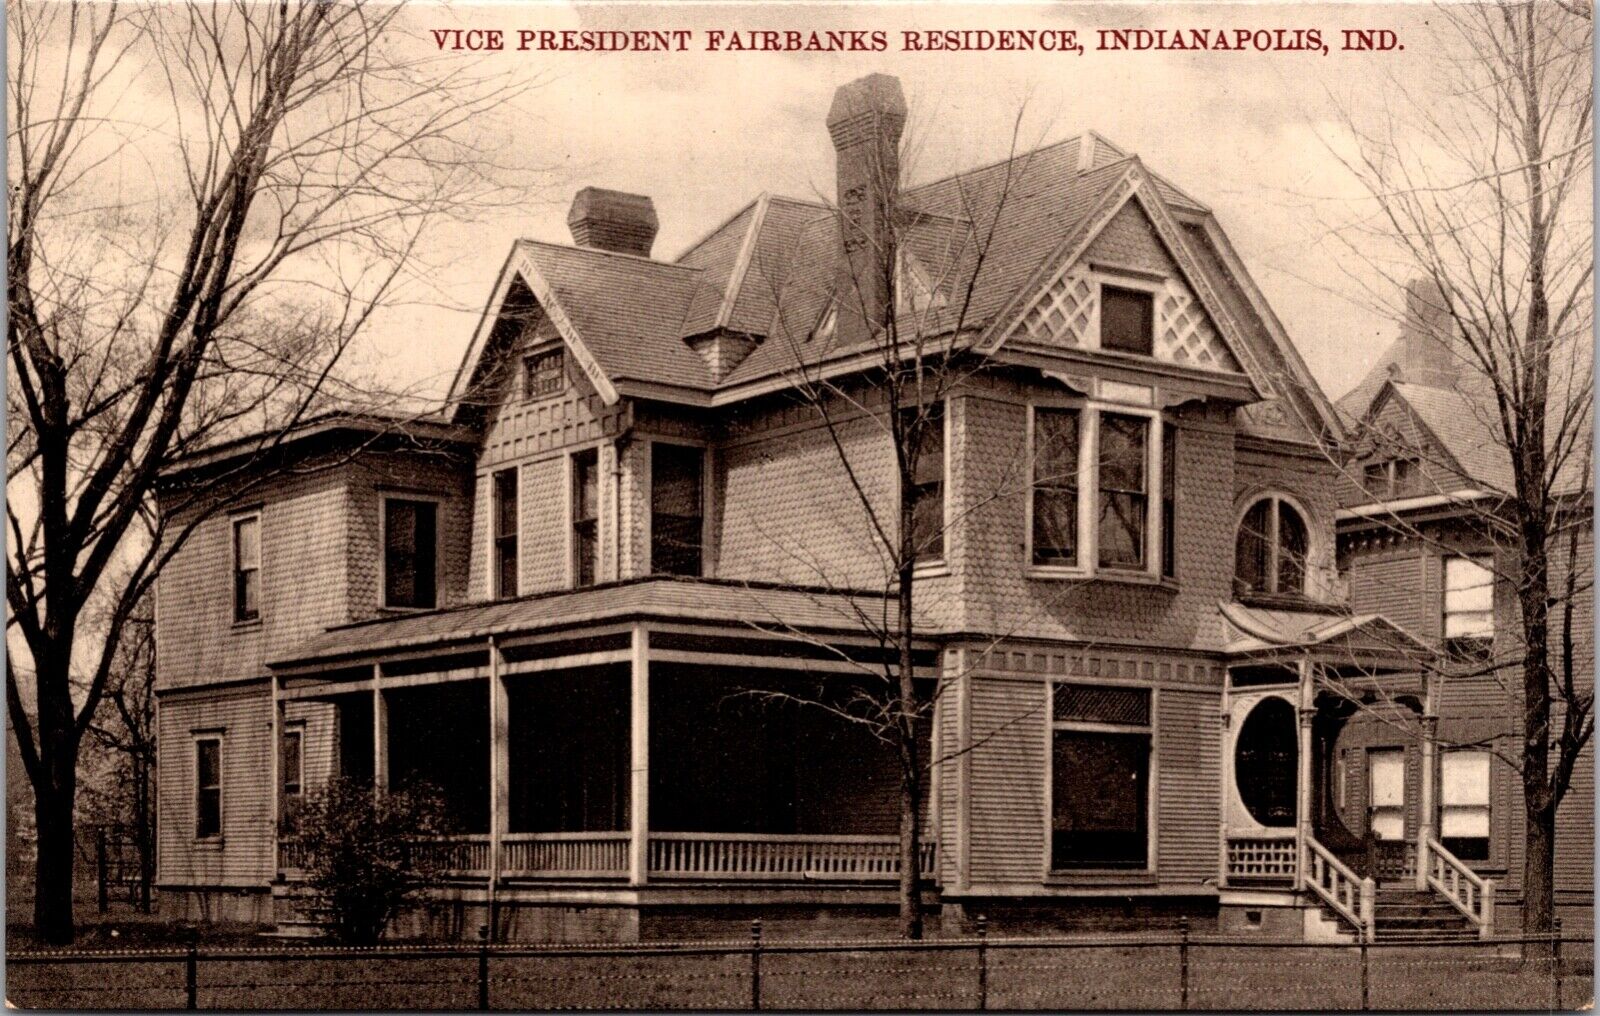 Postcard Vice President Fairbanks Residence in Indianapolis, Indiana